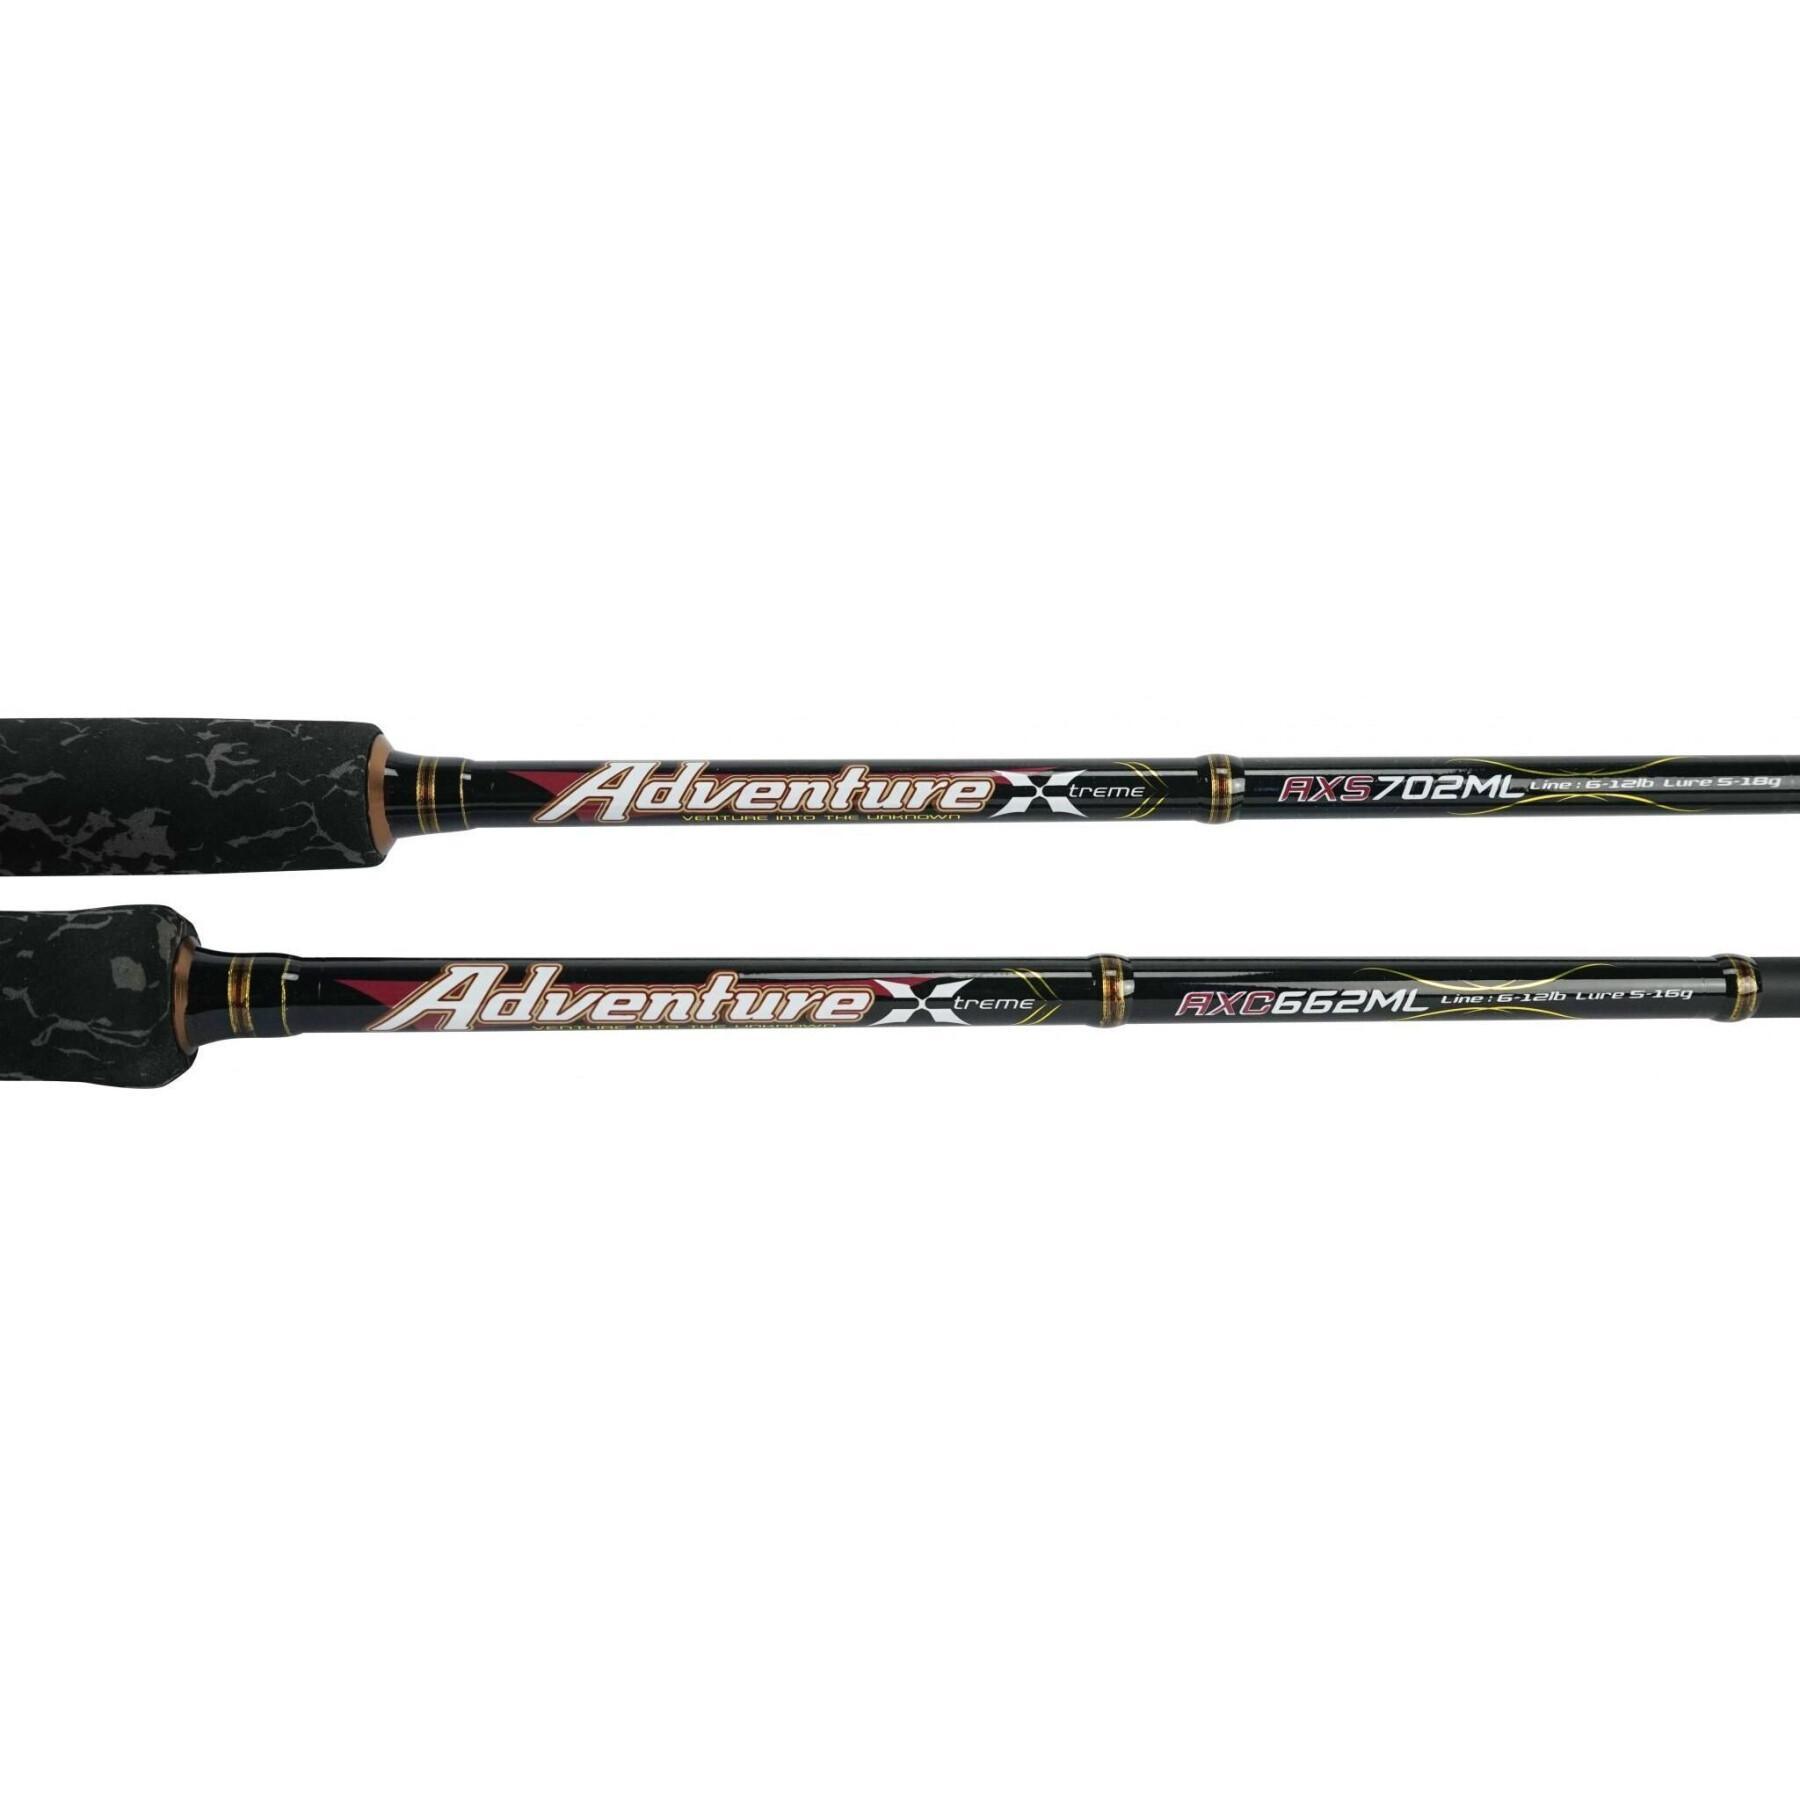 Cana casting Storm Adventure Xtreme 6-12lbs